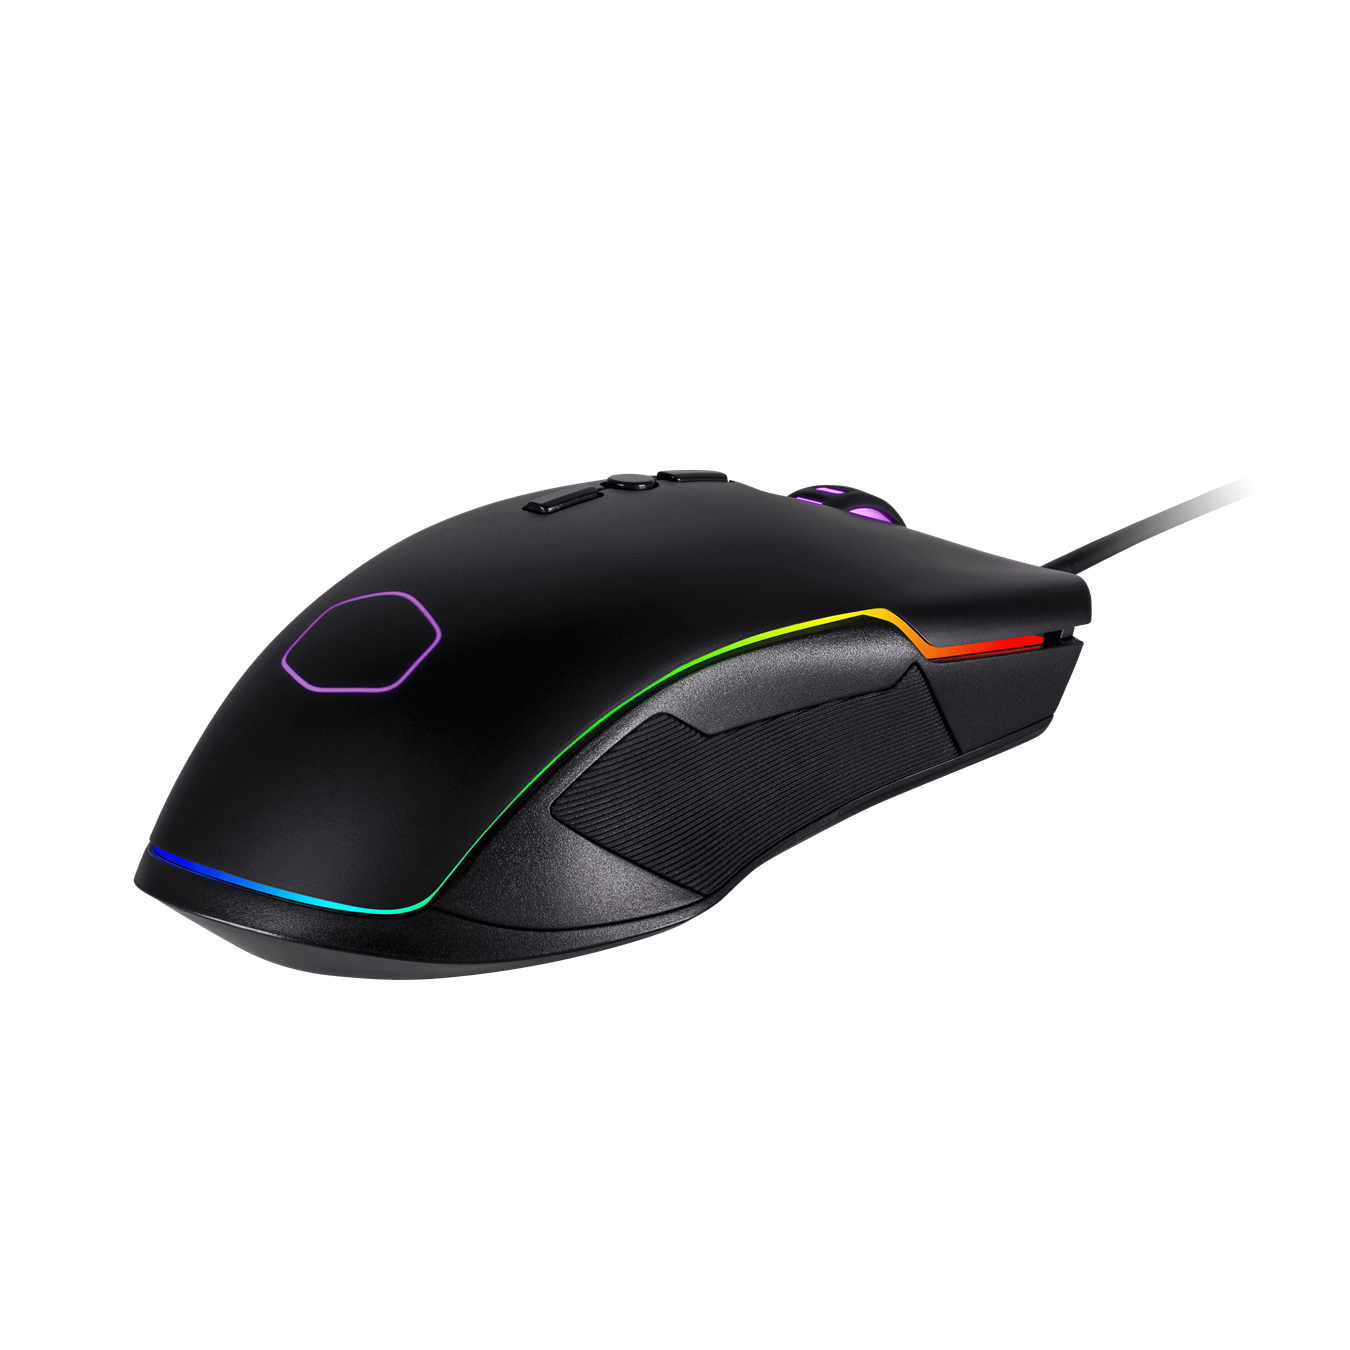 CM310 Gaming Mouse - a10000 DPI sensor offers peak performance during even the most troubling timesand easy access DPI control buttons on the top for quick adjustments.